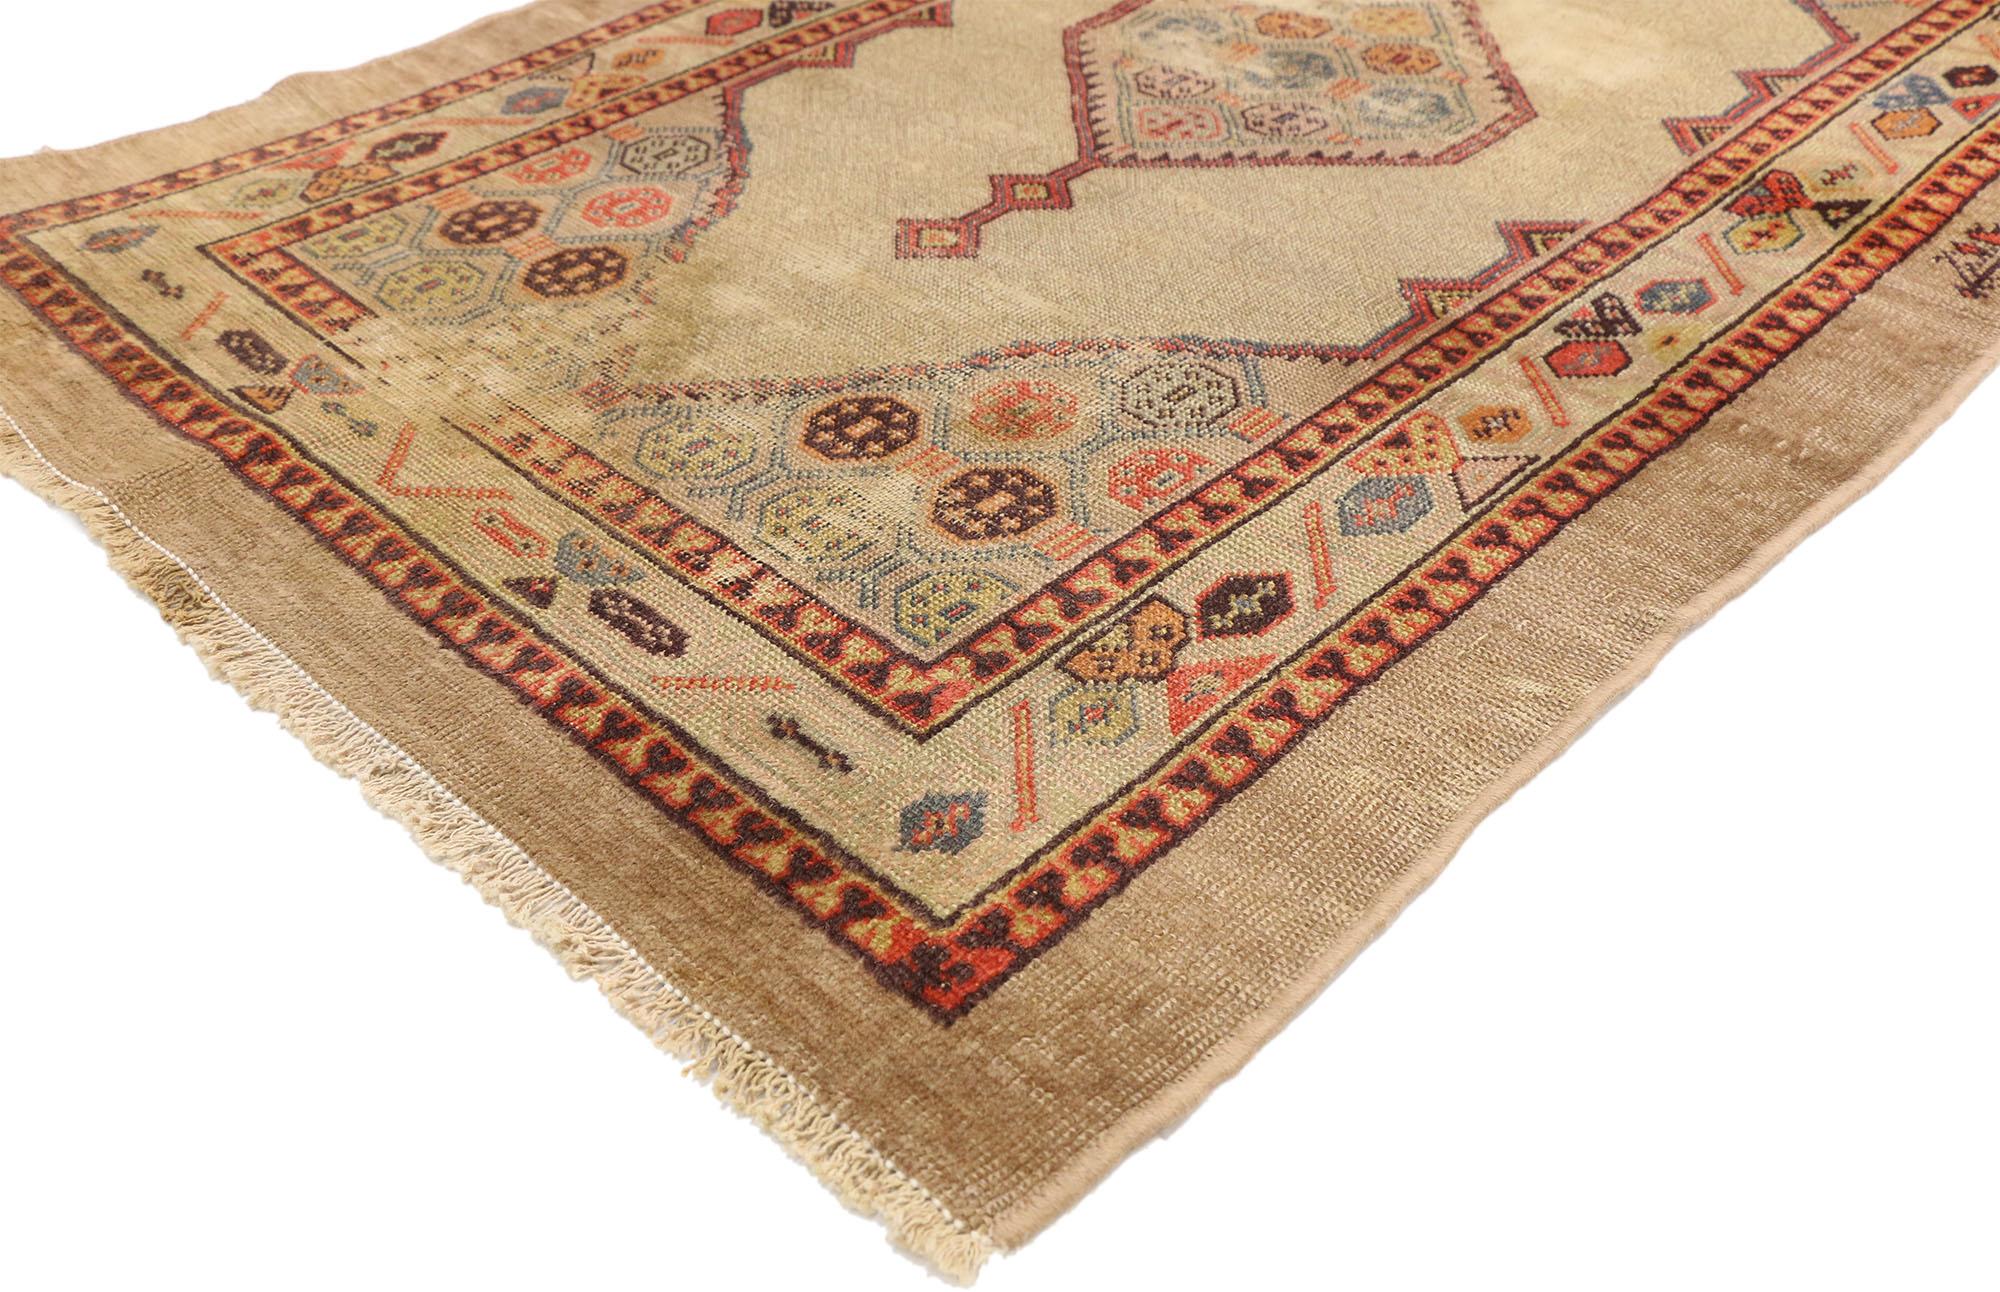 72857 Distressed Antique-Worn Persian Kurdish Rug, 03'04 x 05'07. Originating from Kurdish regions primarily in Iran, but also found in parts of Iraq, Turkey, and Syria, Persian Kurdish rugs are revered for their quality, craftsmanship, and